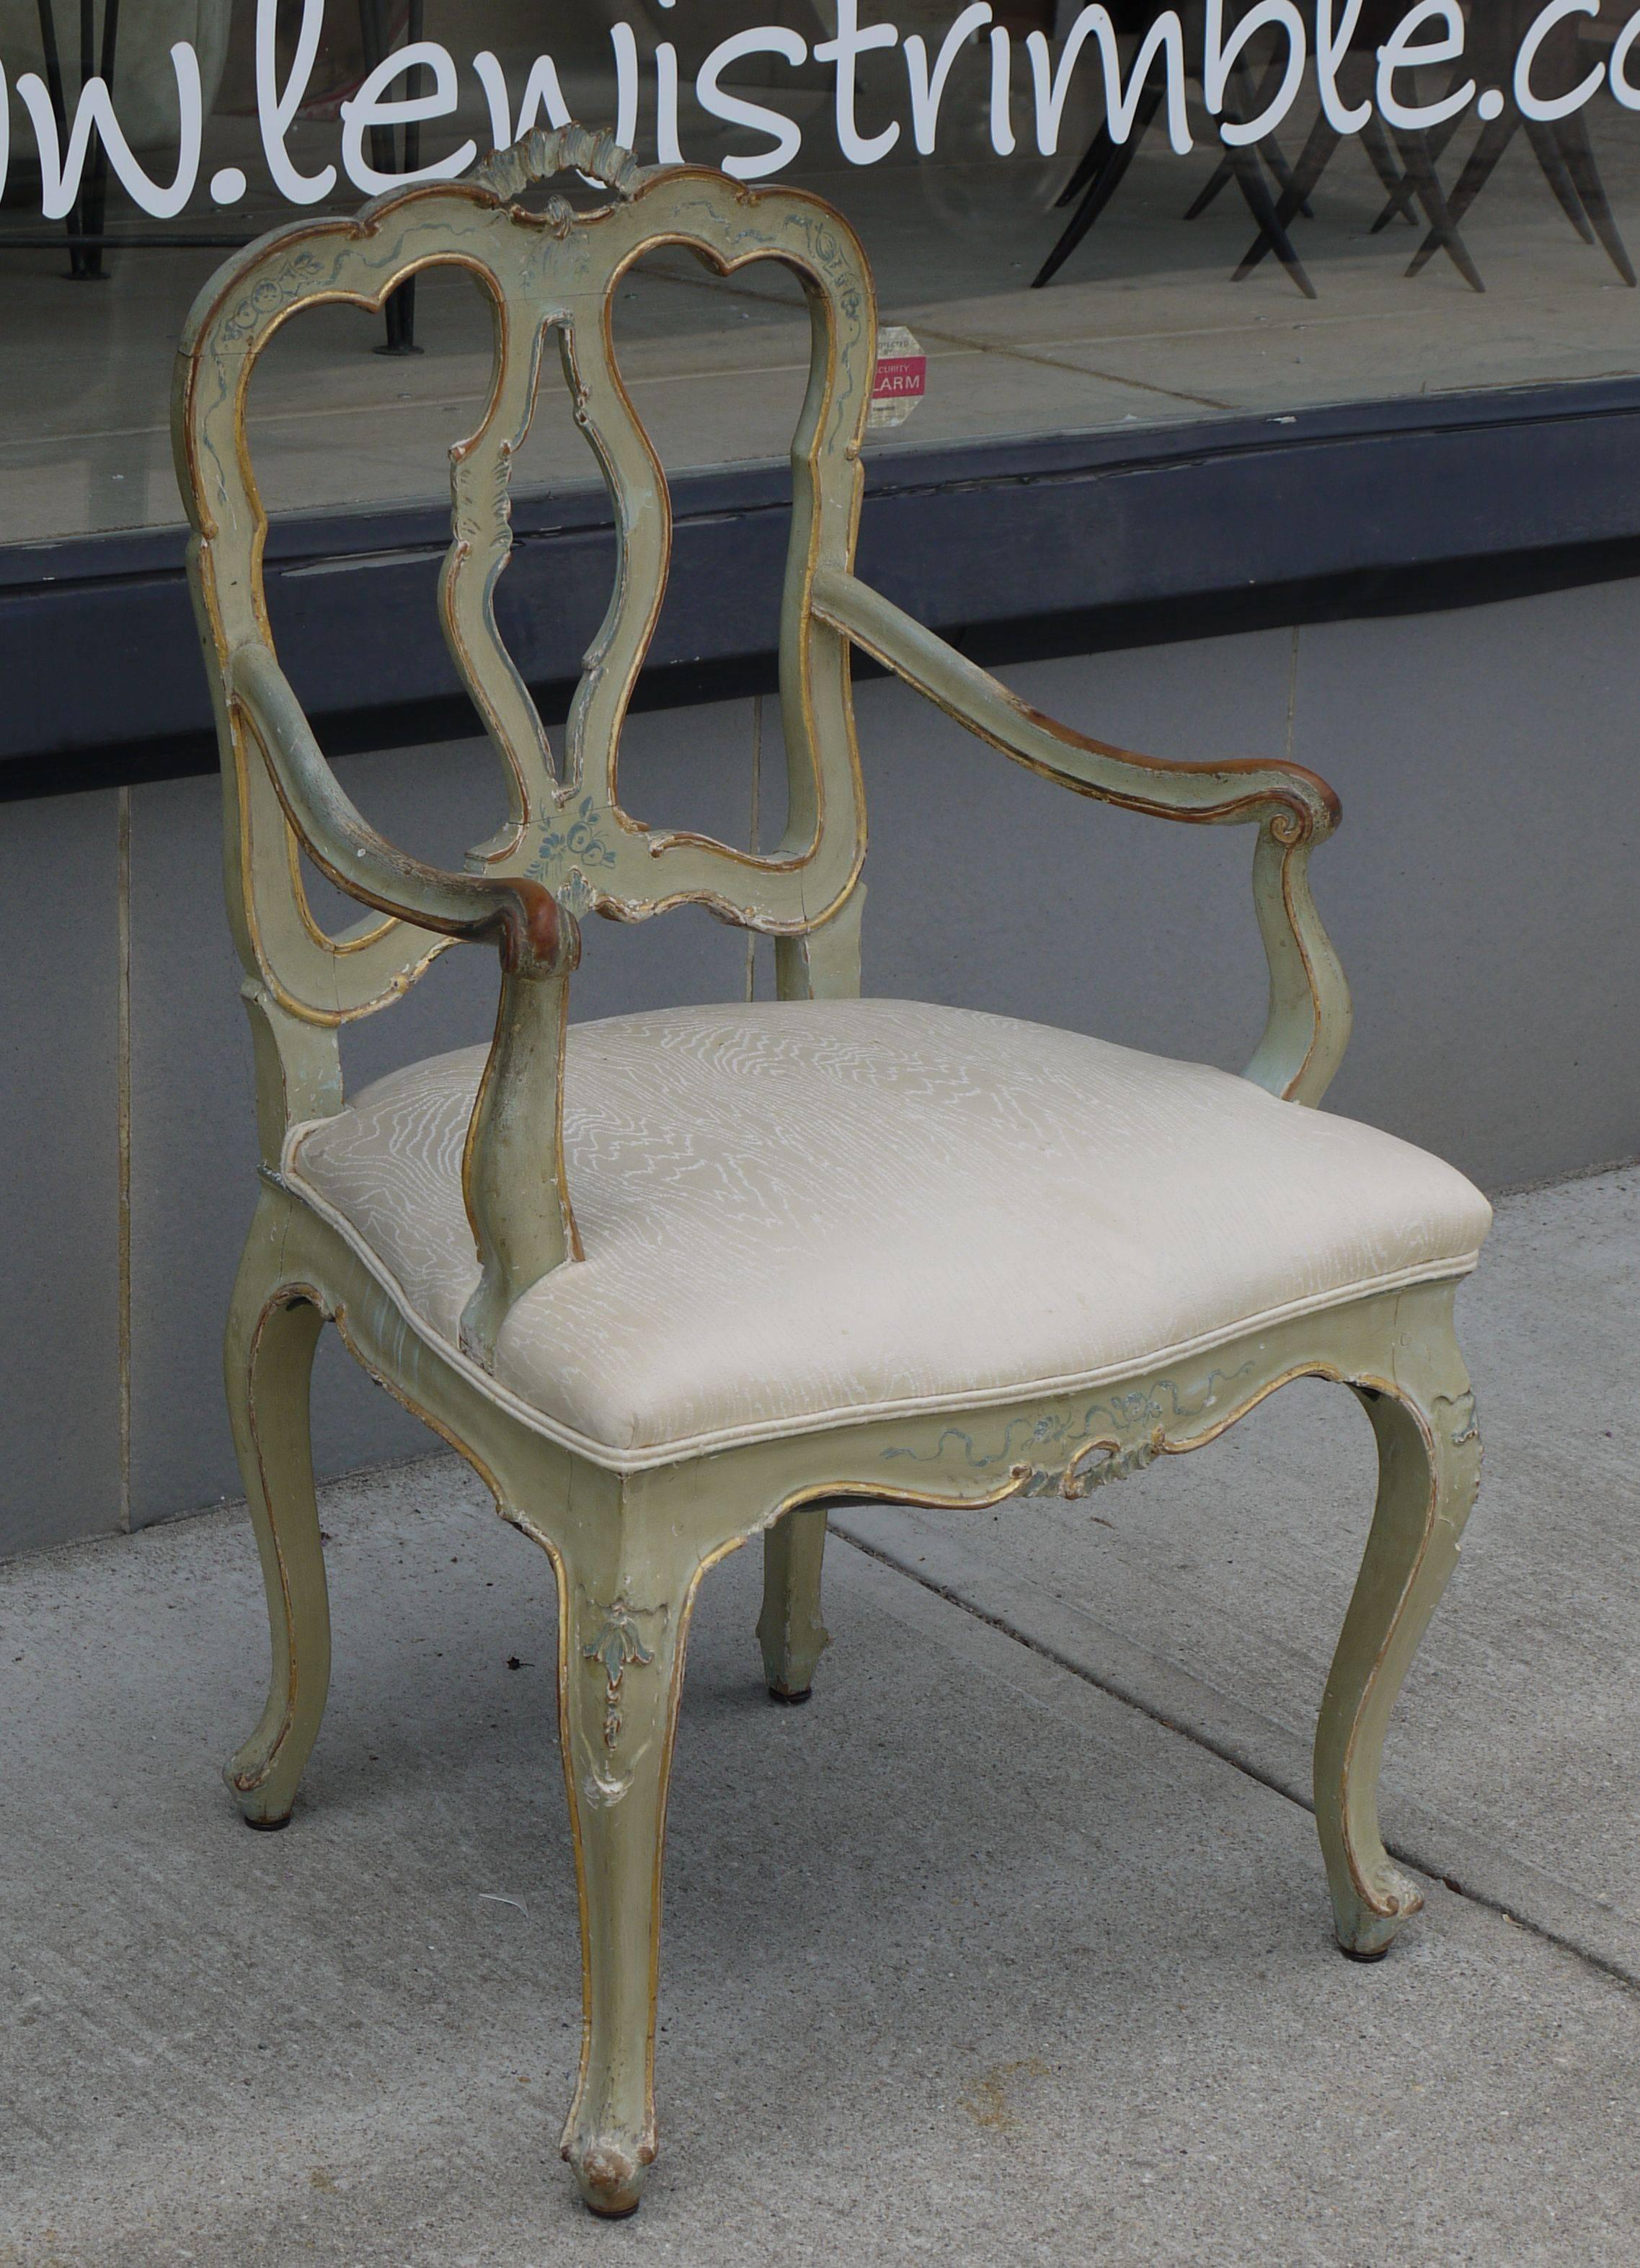 A stunning matched set of eight Venetian chairs dating to the mid-late 19th century. Wonderful oxidized paint and water gilt detailing to the chairs, with subtle brush work and a magnificent patina. The pale celadon color is just perfect. Most